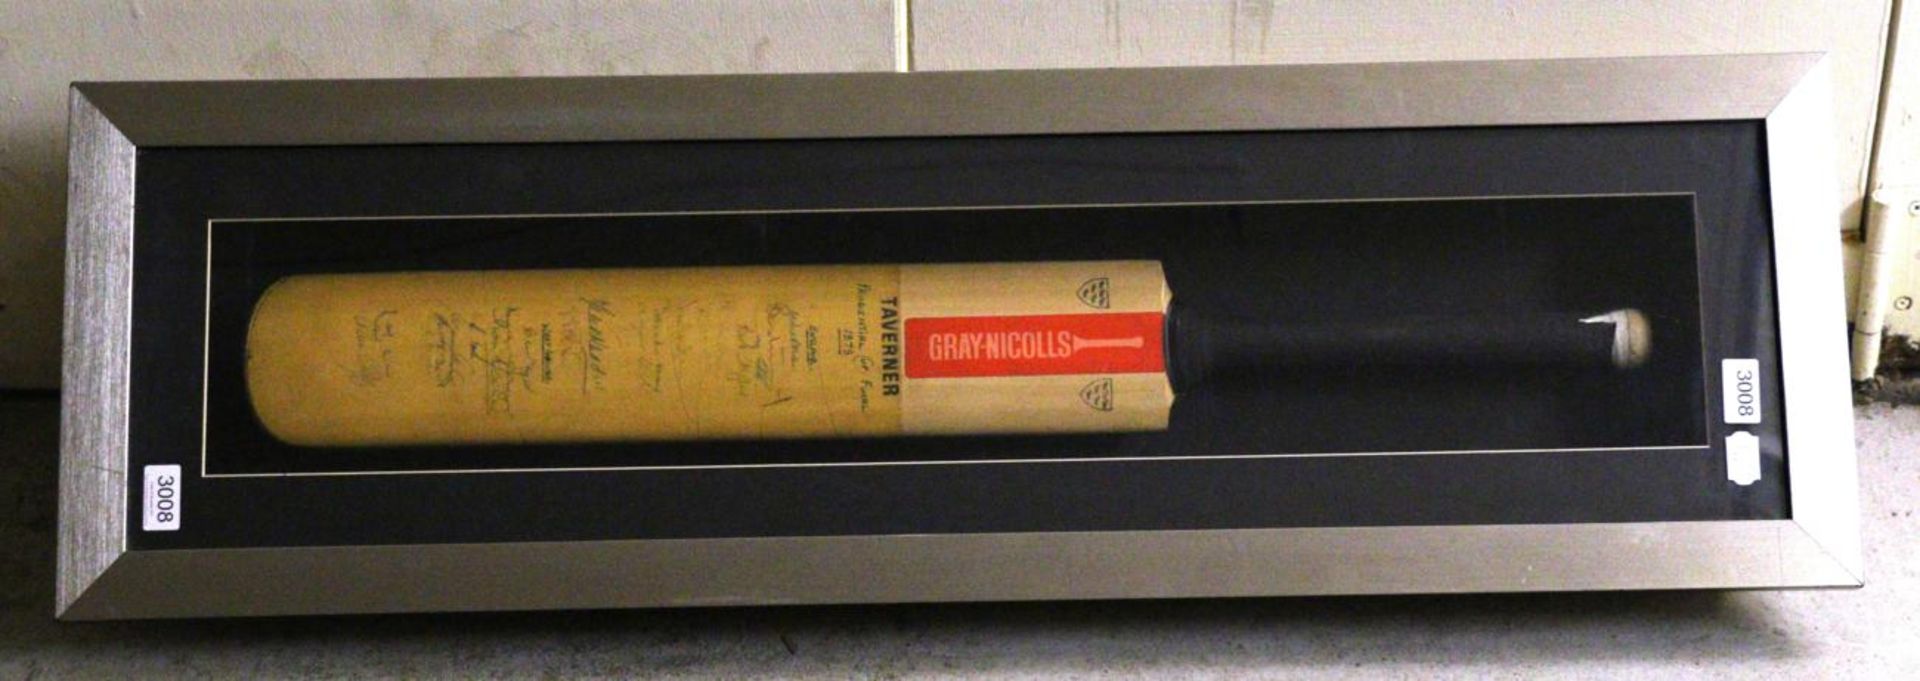 A Signed Prudential Cup Final 1979 Cricket Bat, with signatures of England and West Indies